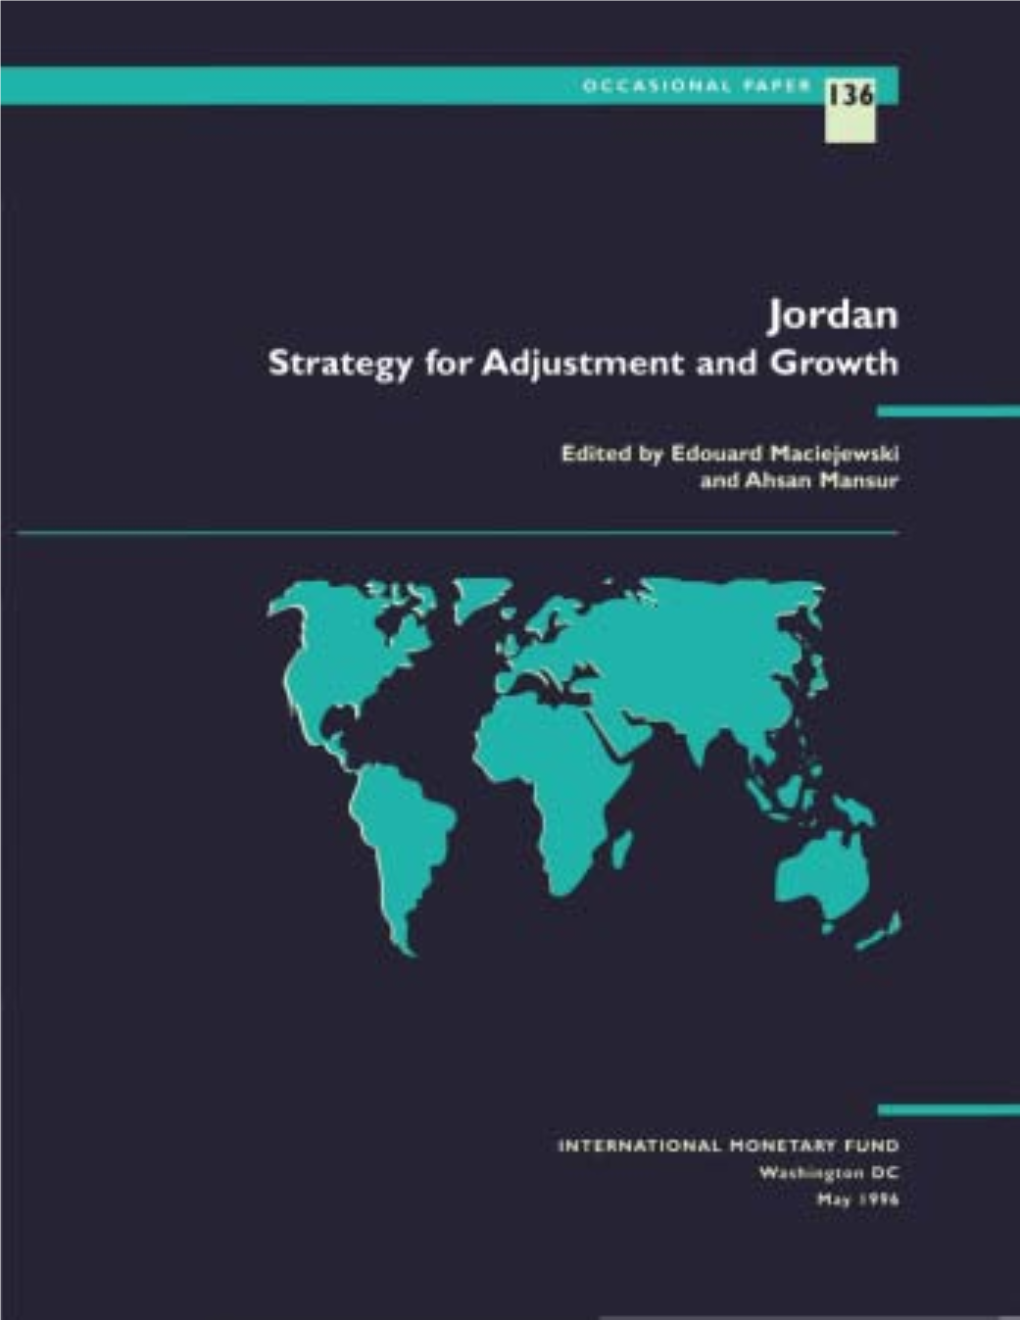 Jordan: Strategy for Adjustment and Growth